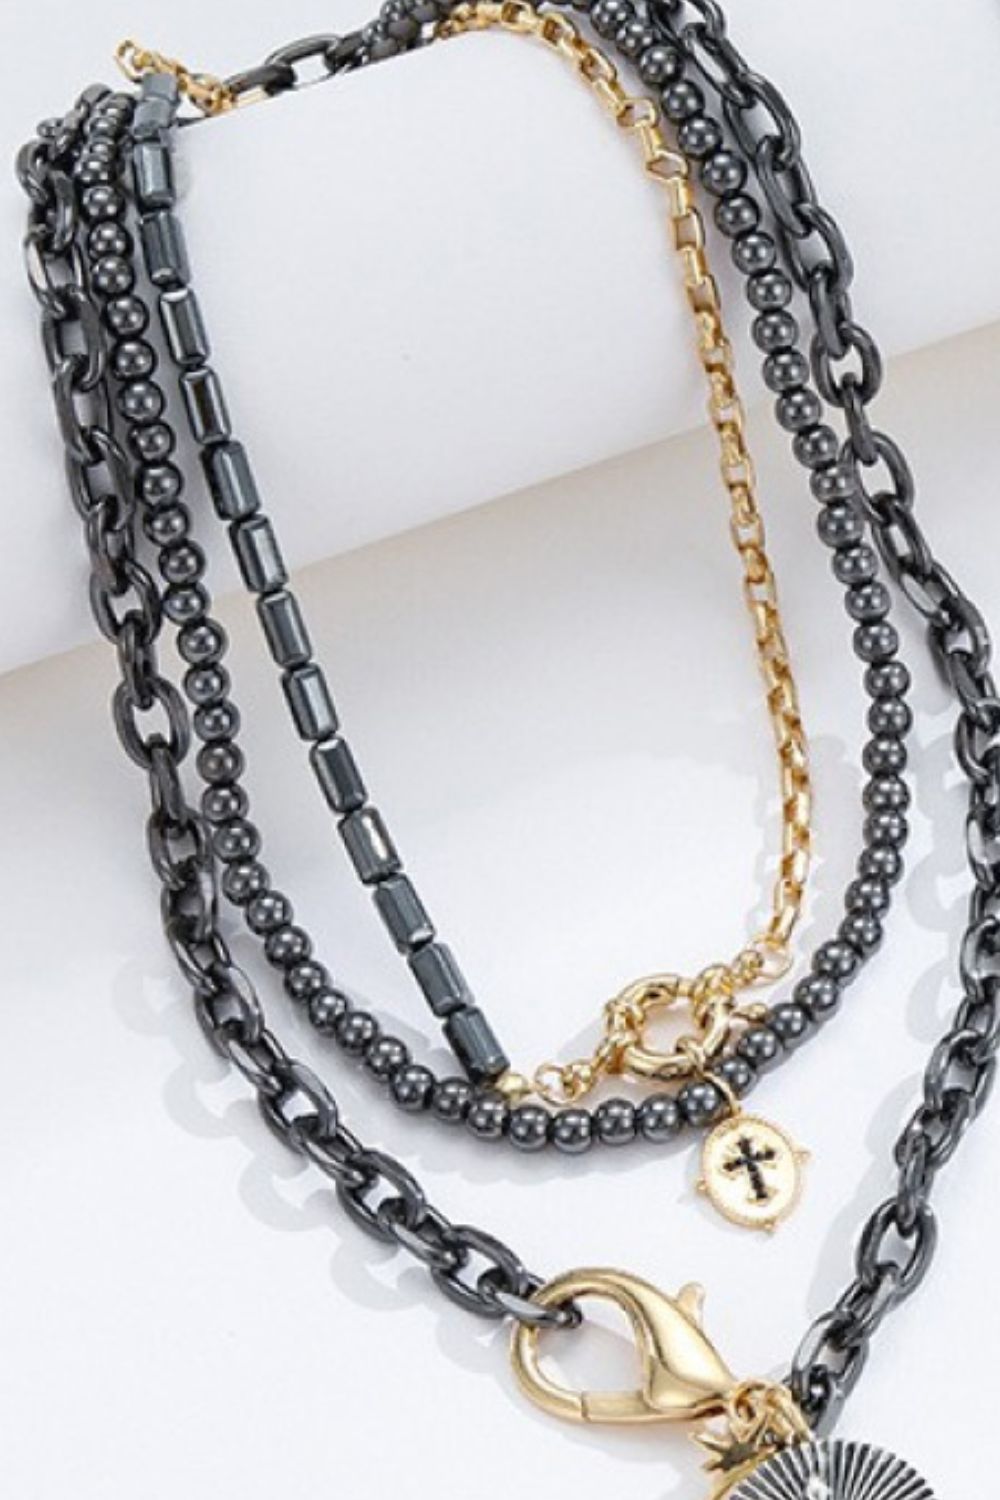 Snake and Cross Pendant Three-Piece Necklace Set - Necklaces - FITGGINS